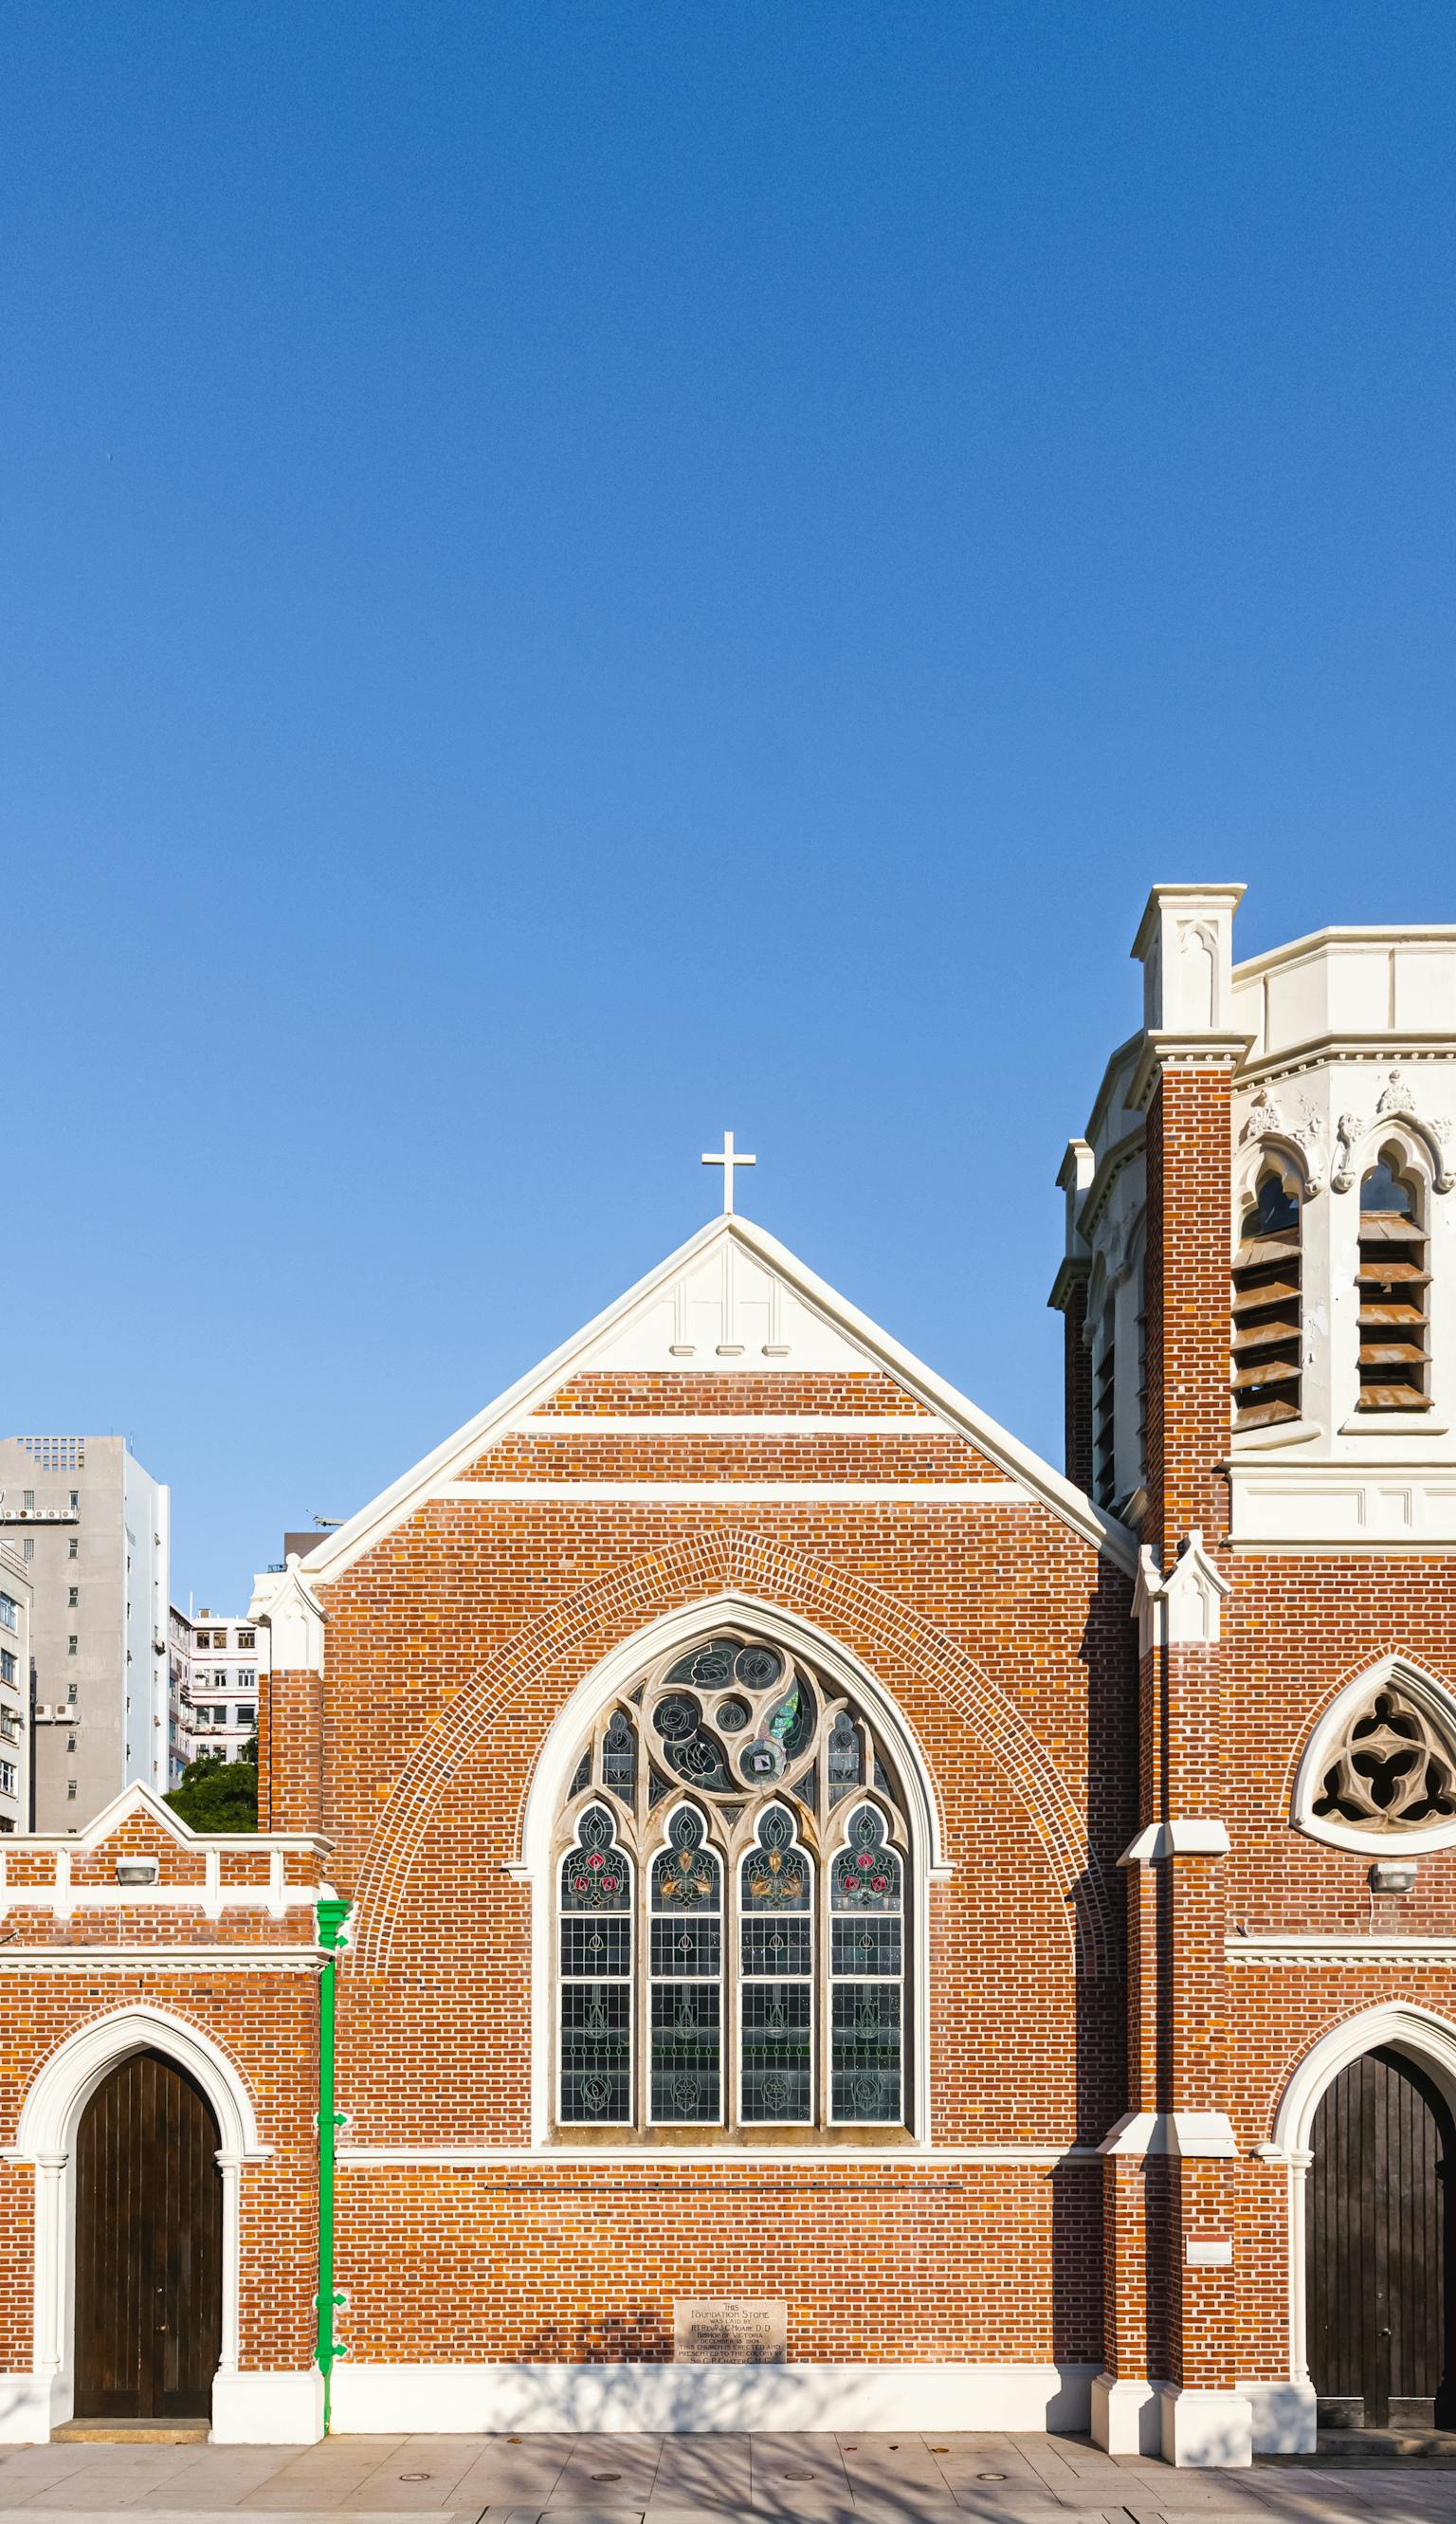 Exterior of St Andrew's Church, Kowloon, Hong Kong. Purcell provided funding assistance and a condition survey for the client.